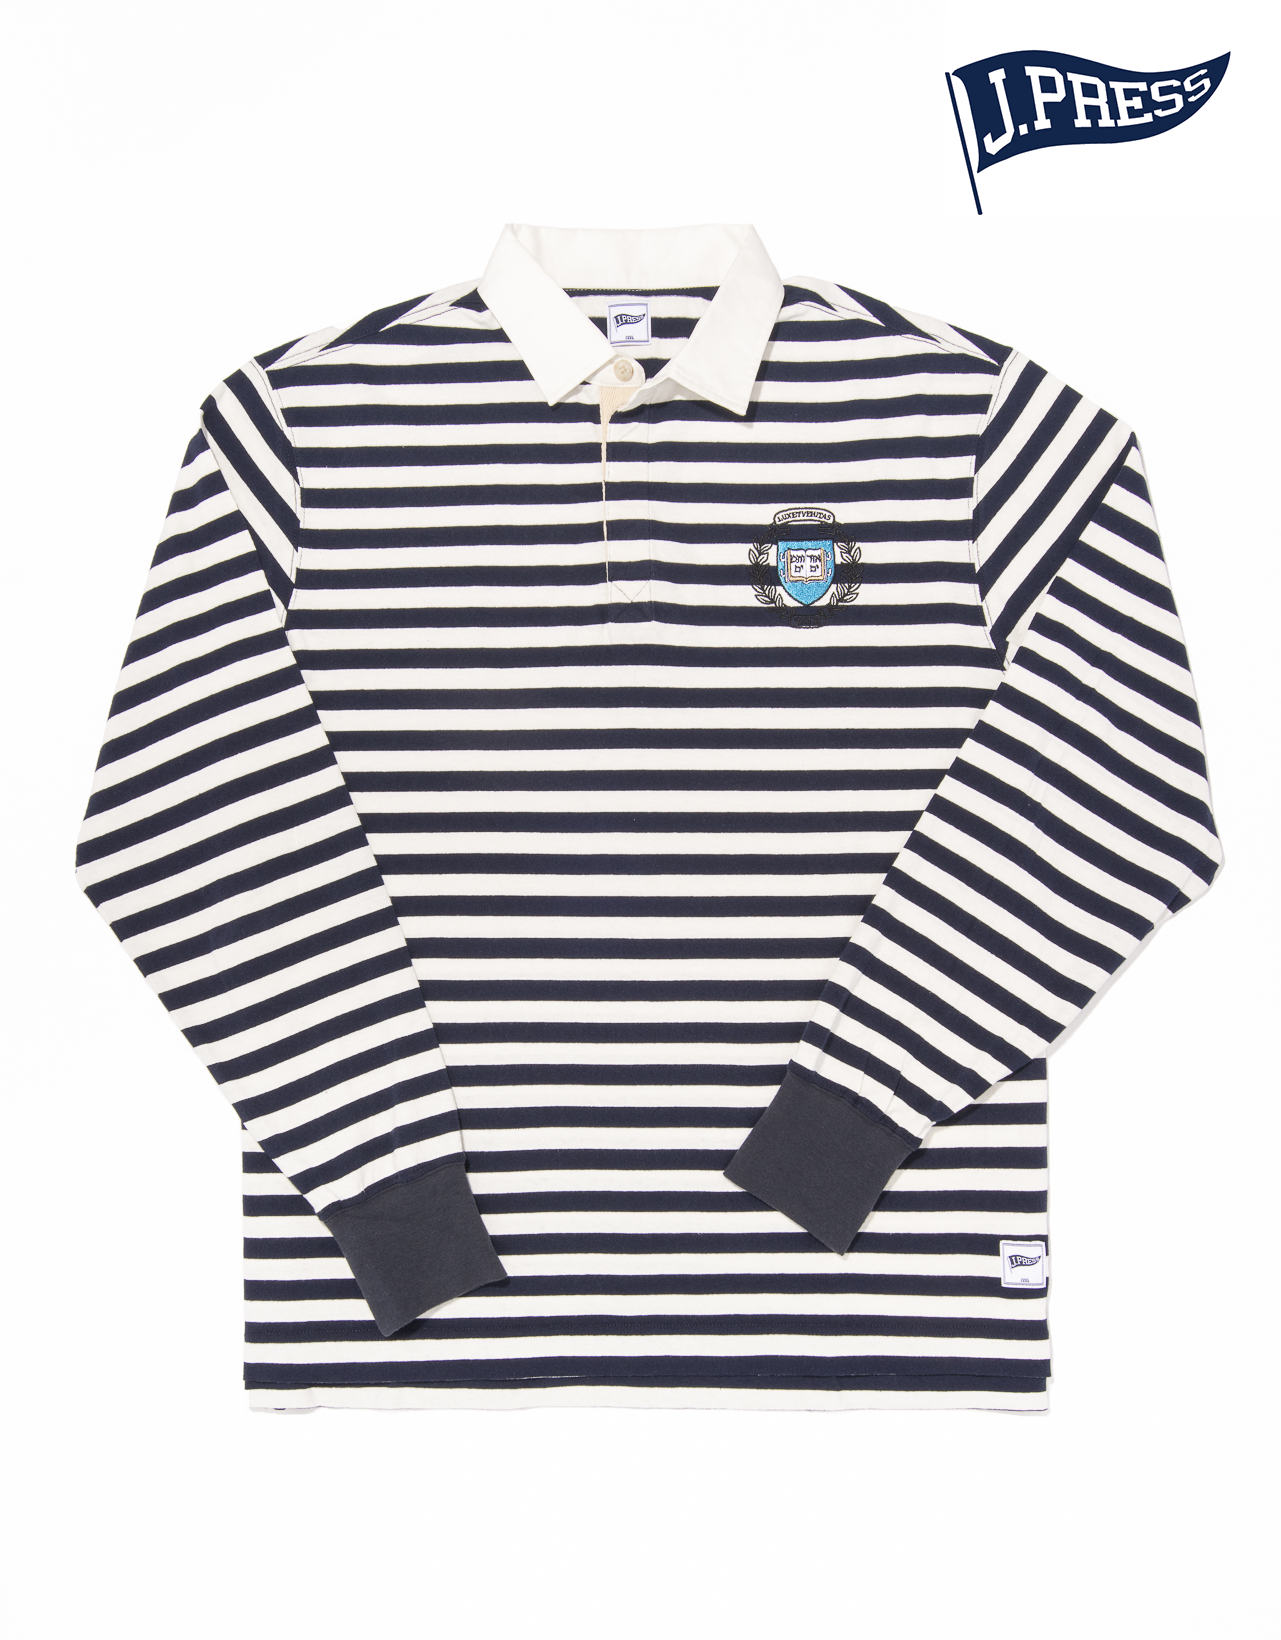 YALE STRIPE RUGBY SHIRT - WHITE/NAVY